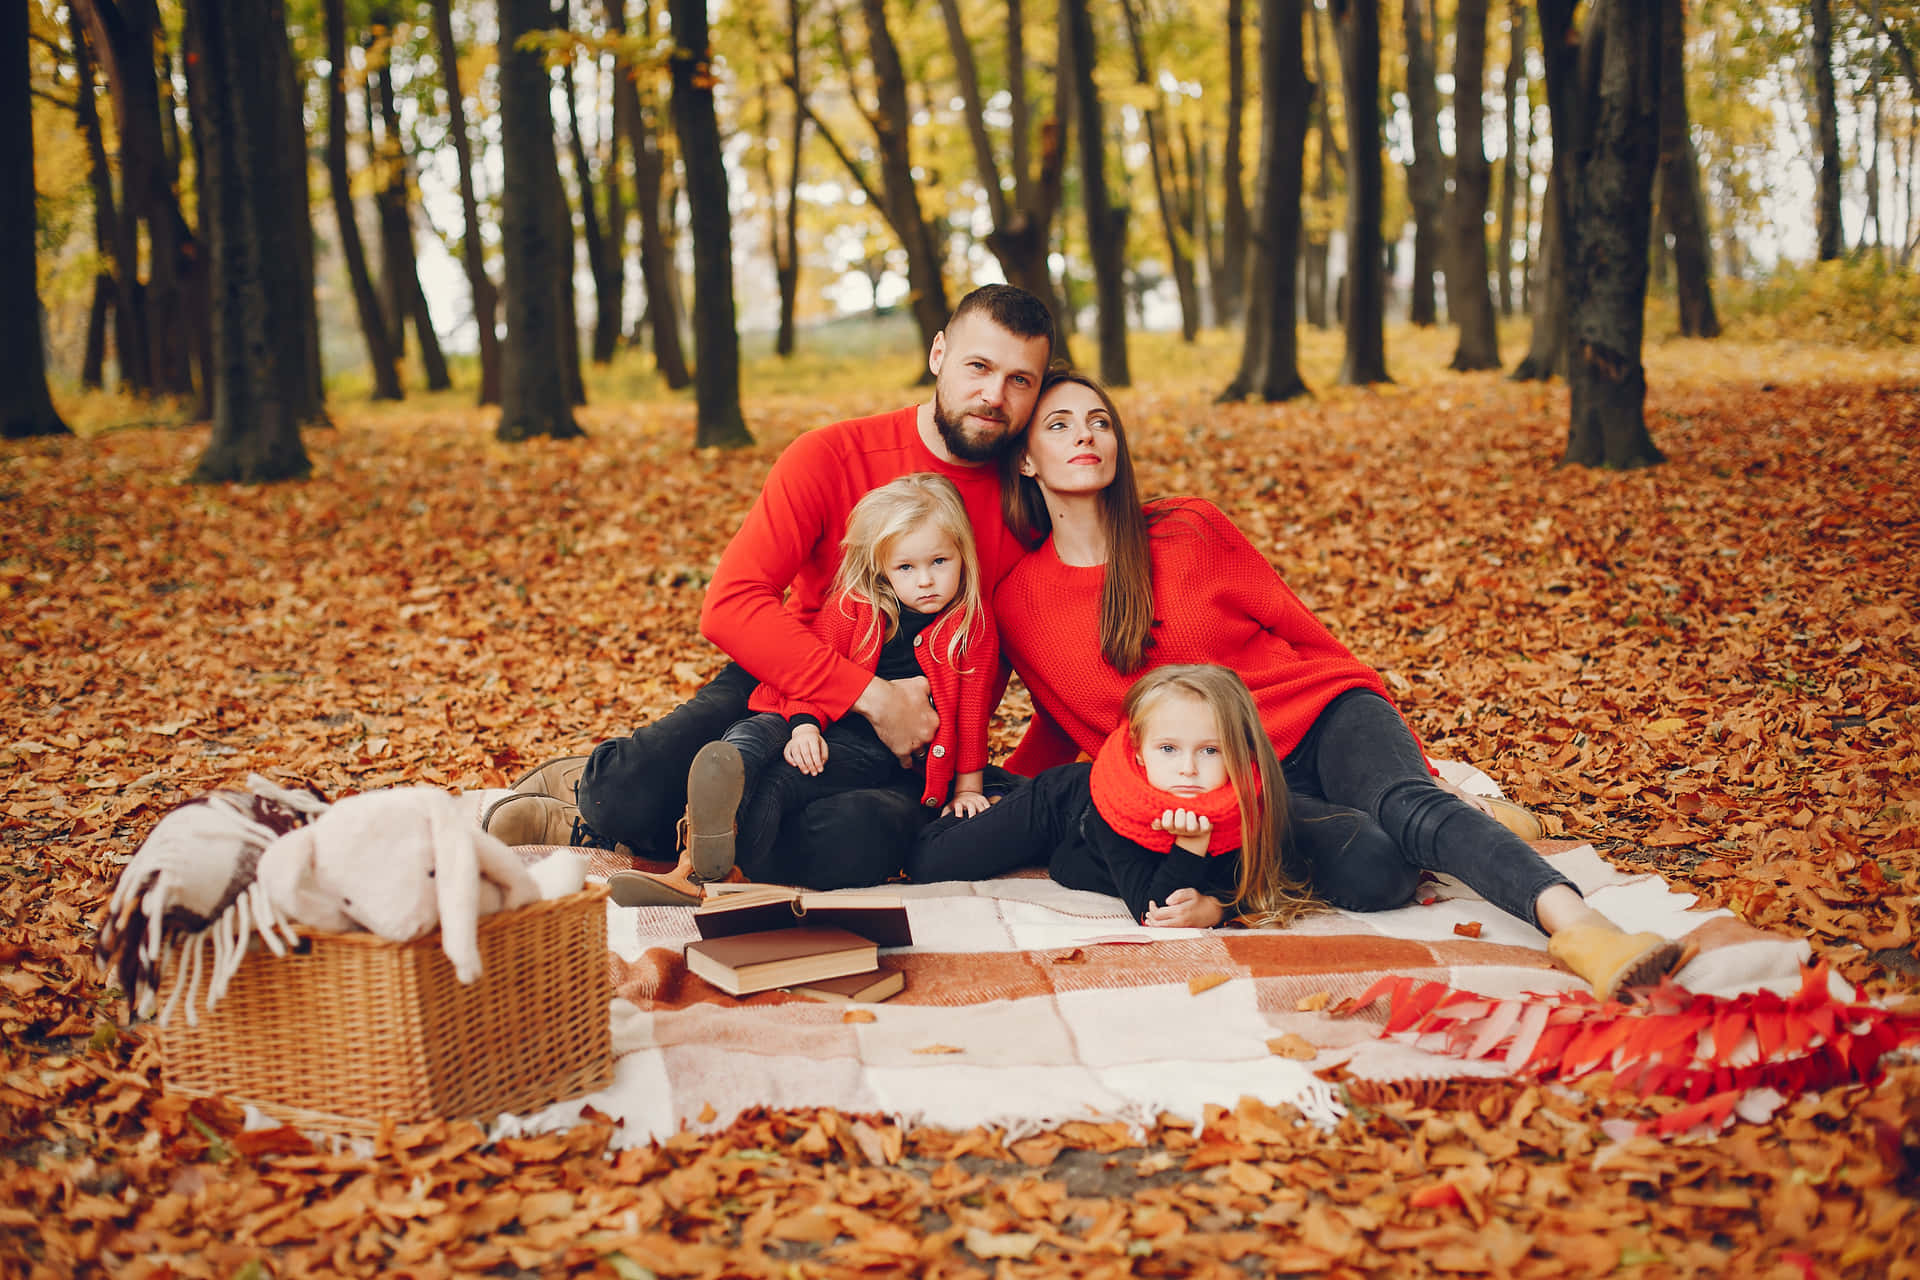 Family Portrait In The Autumn Forest